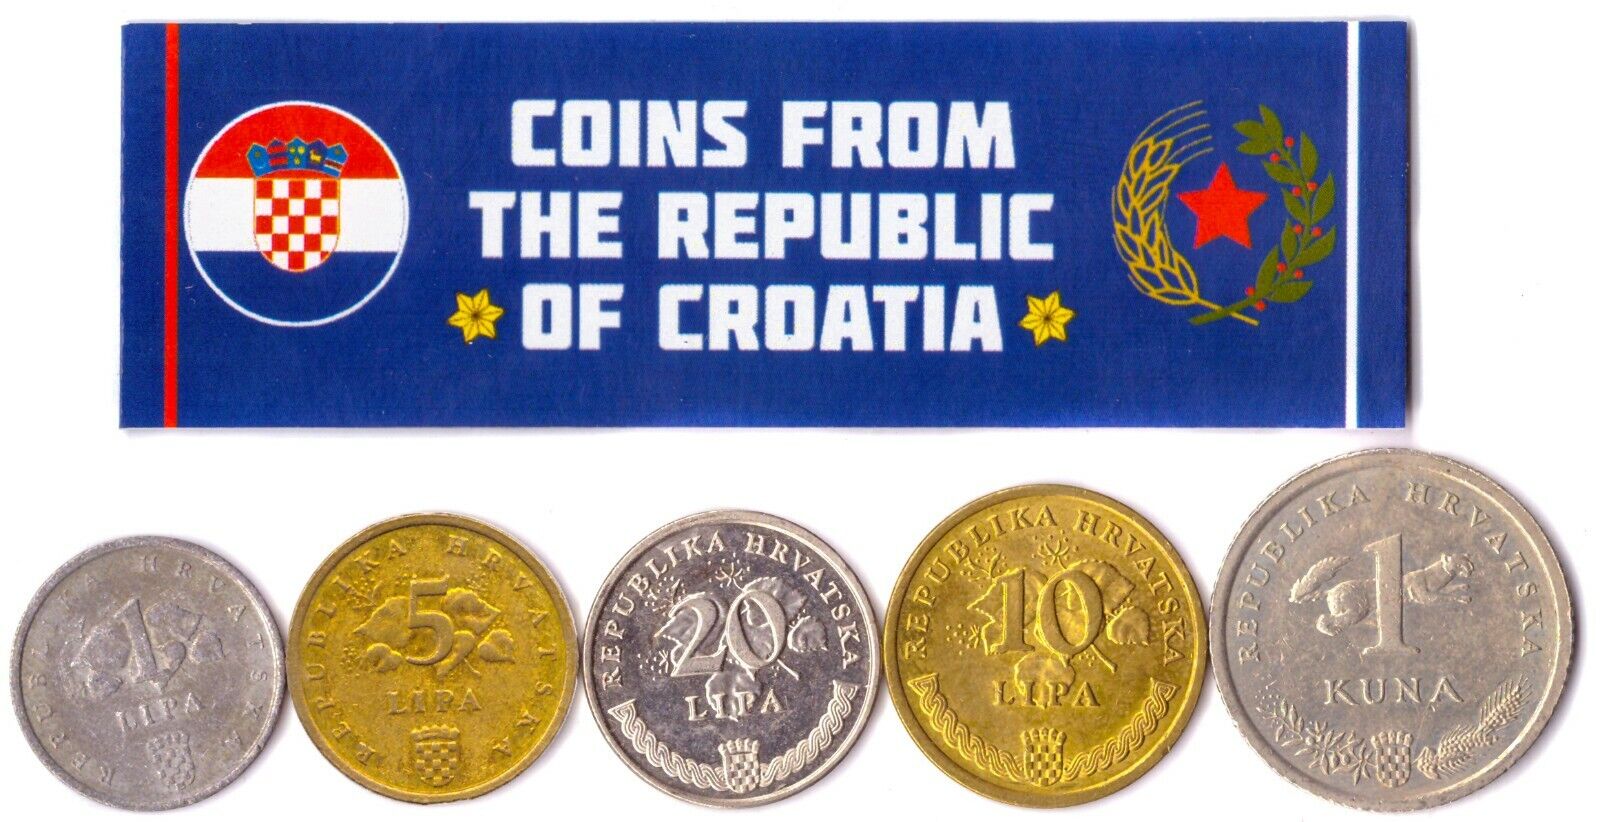 5 CROATIAN COINS. DIFFERENT COINS FROM BALKANS. FOREIGN CURRENCY, VALUABLE MONEY Без бренда - фотография #2